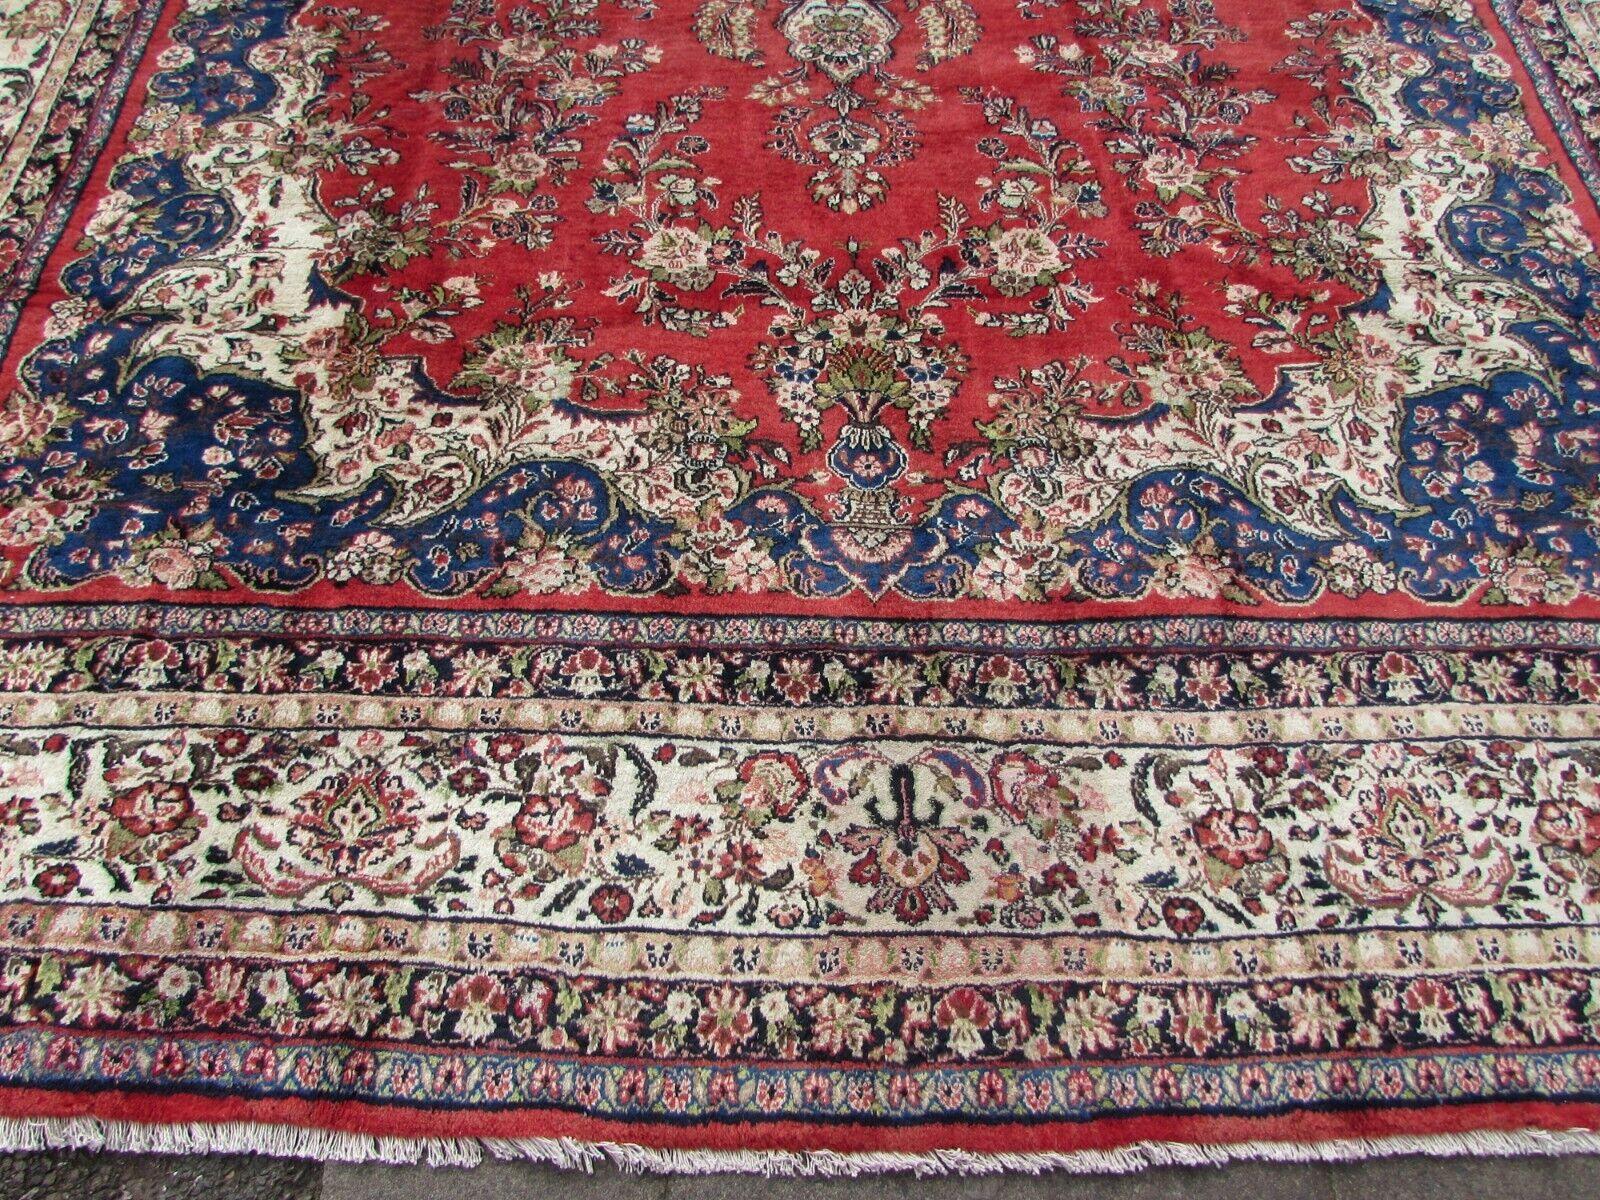 Handmade Vintage Persian Style Sarouk Oversize Rug 10.7' x 16.4', 1970s - 1Q72 For Sale 3